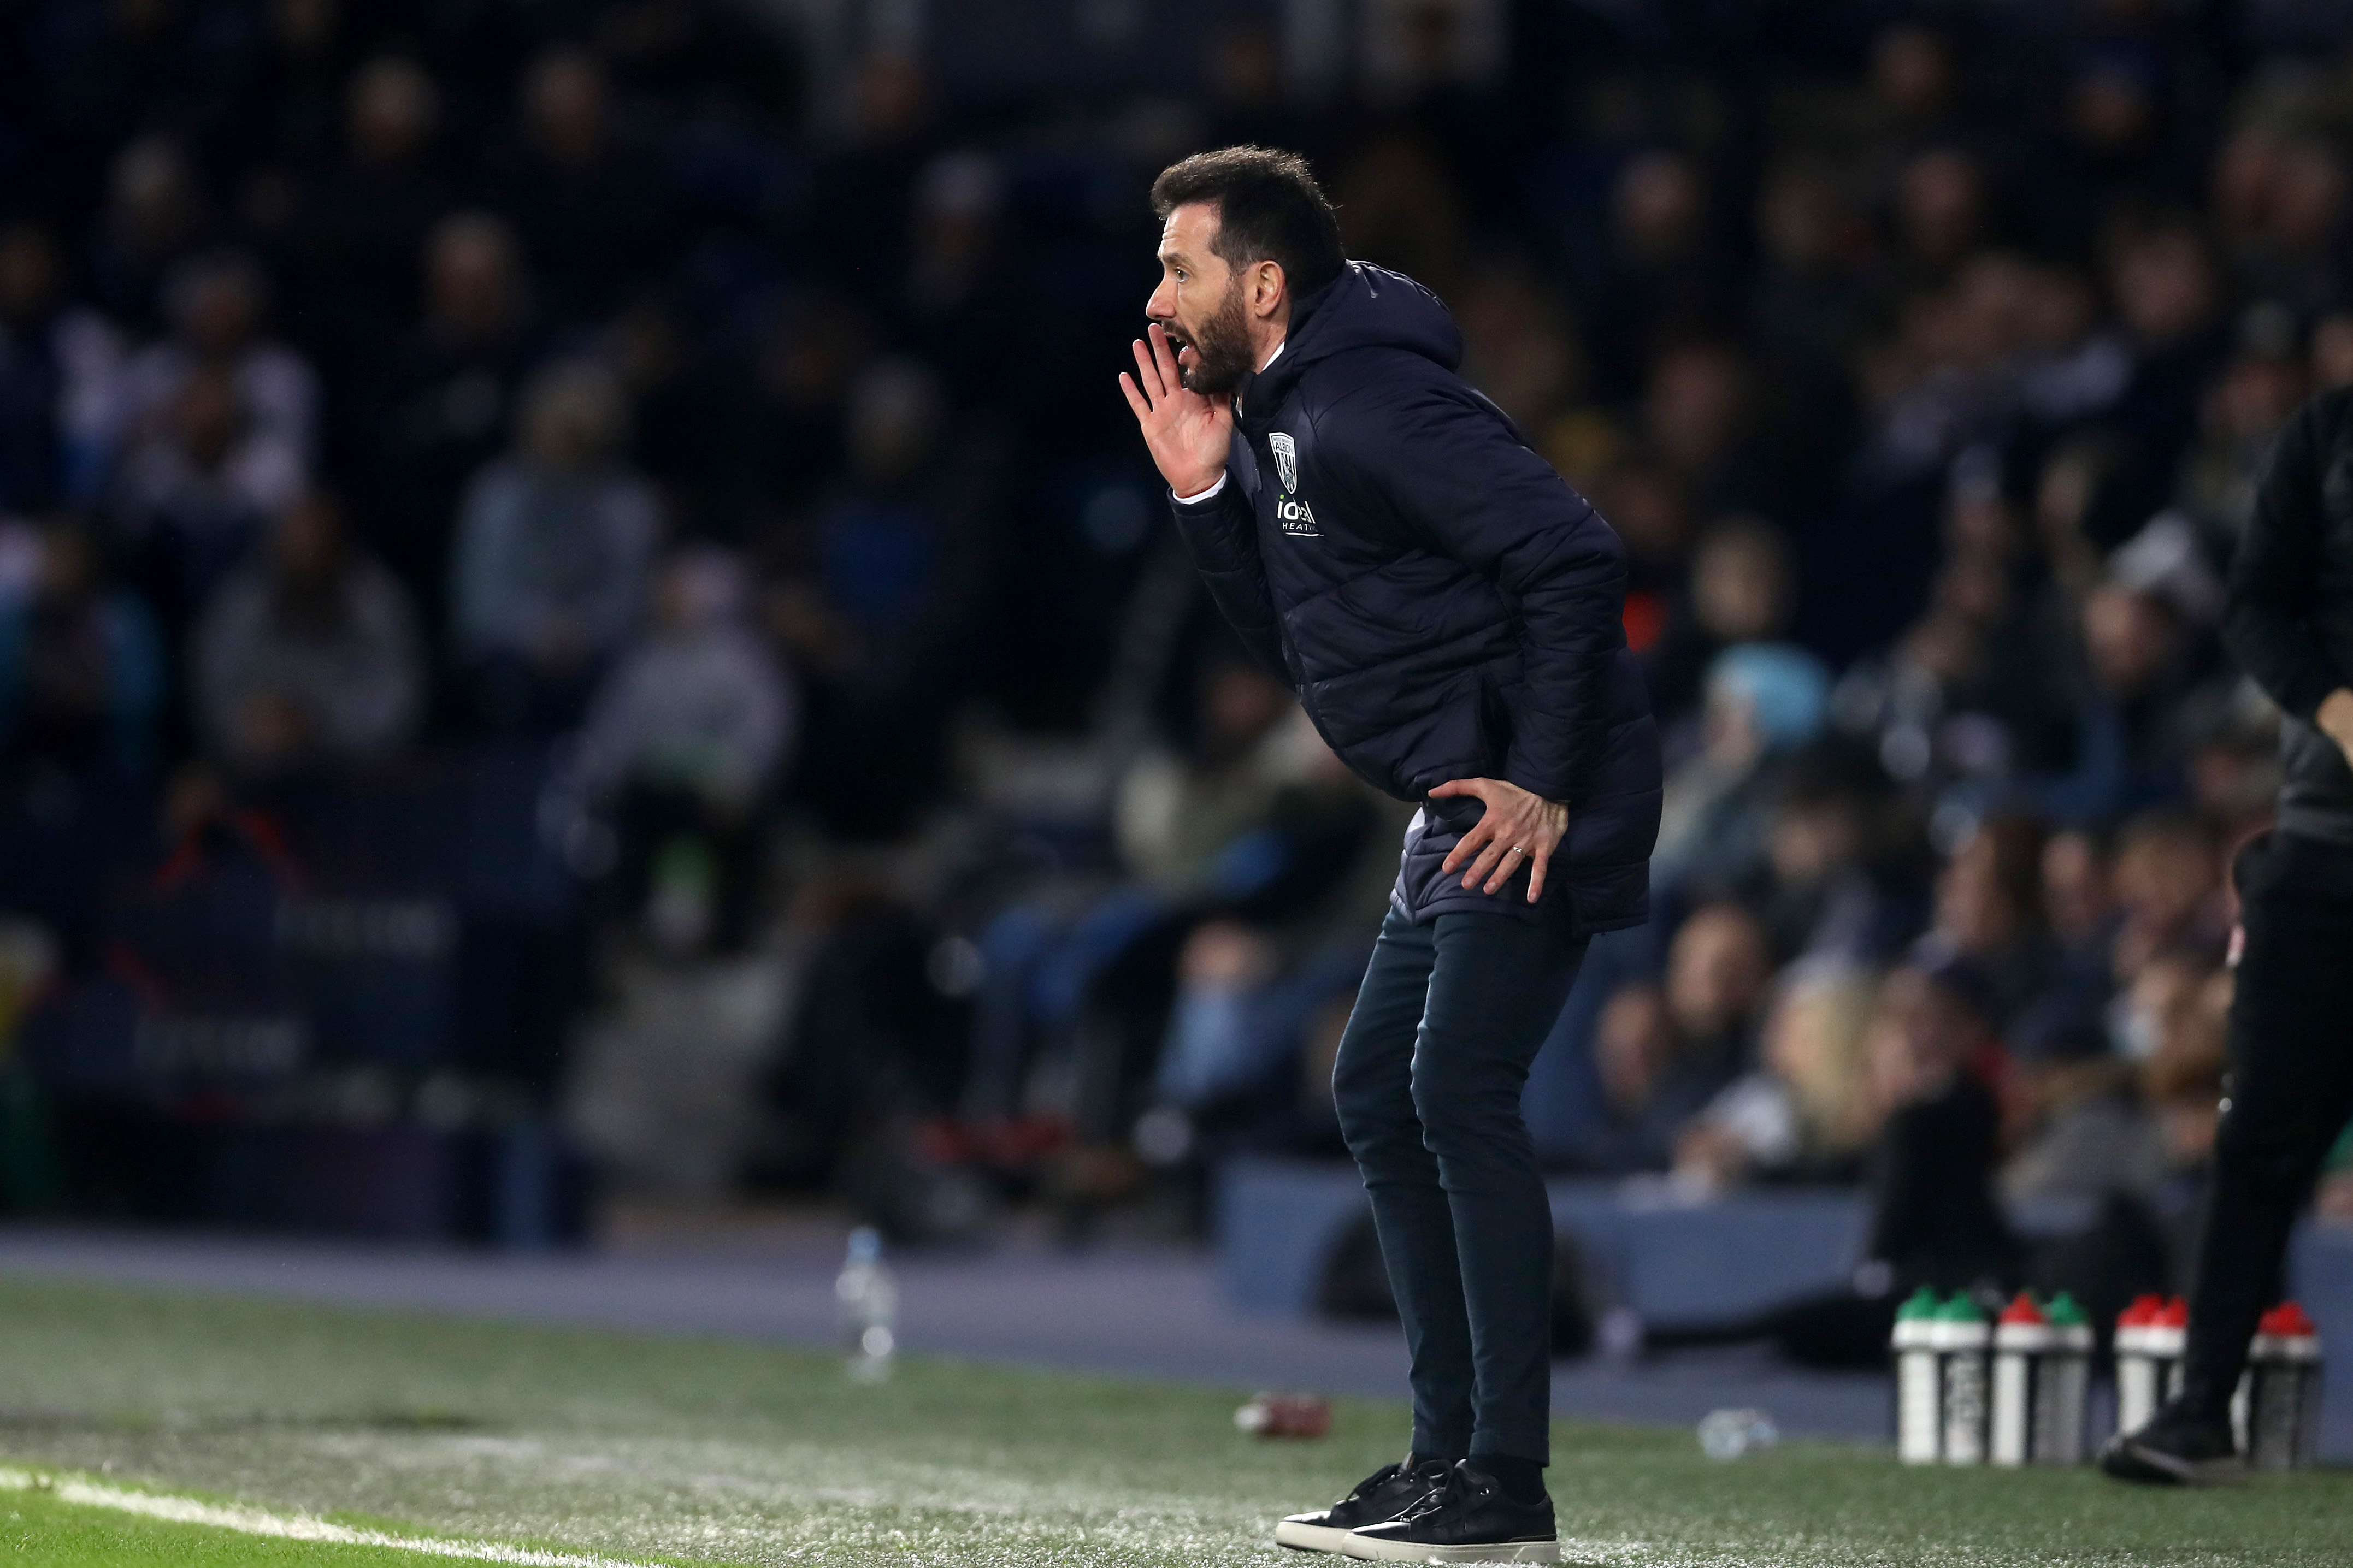 Carlos Corberán shouting to his players on the side of the pitch at The Hawthorns